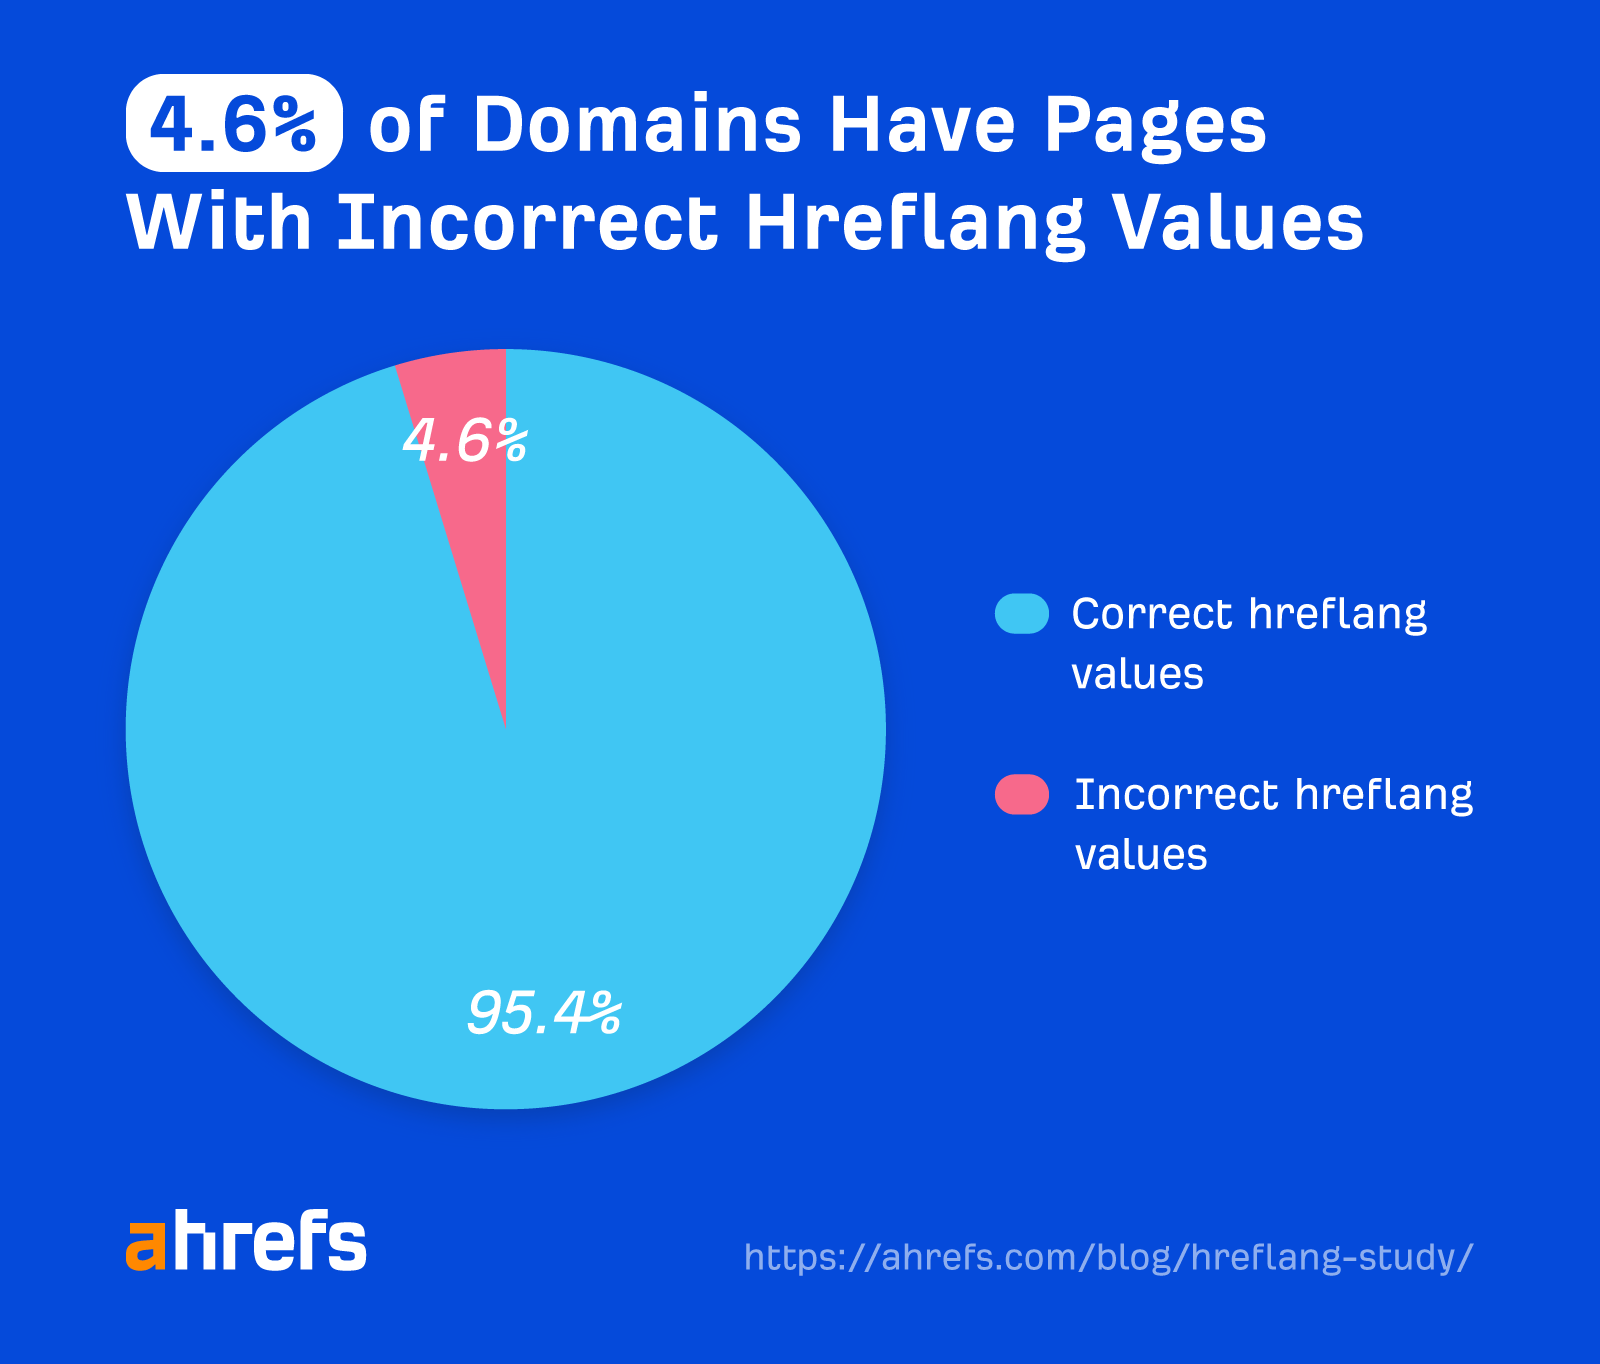 4.6% of domains have pages with incorrect hreflang values